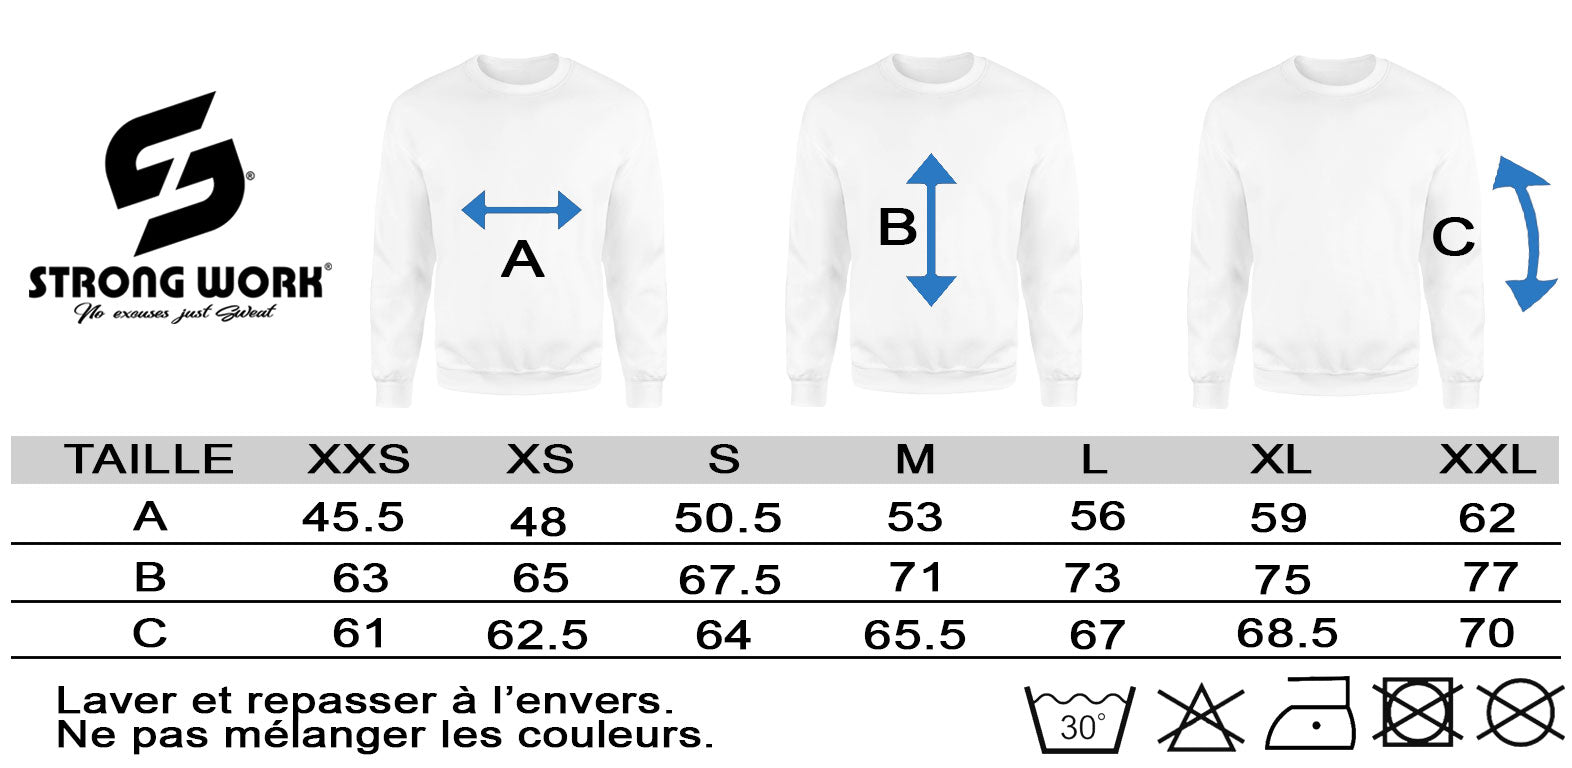 GUIDE DES TAILLES STRONG WORK - SWEAT-SHIRT EN COTON BIO STRONG WORK PRODIGY POUR HOMME